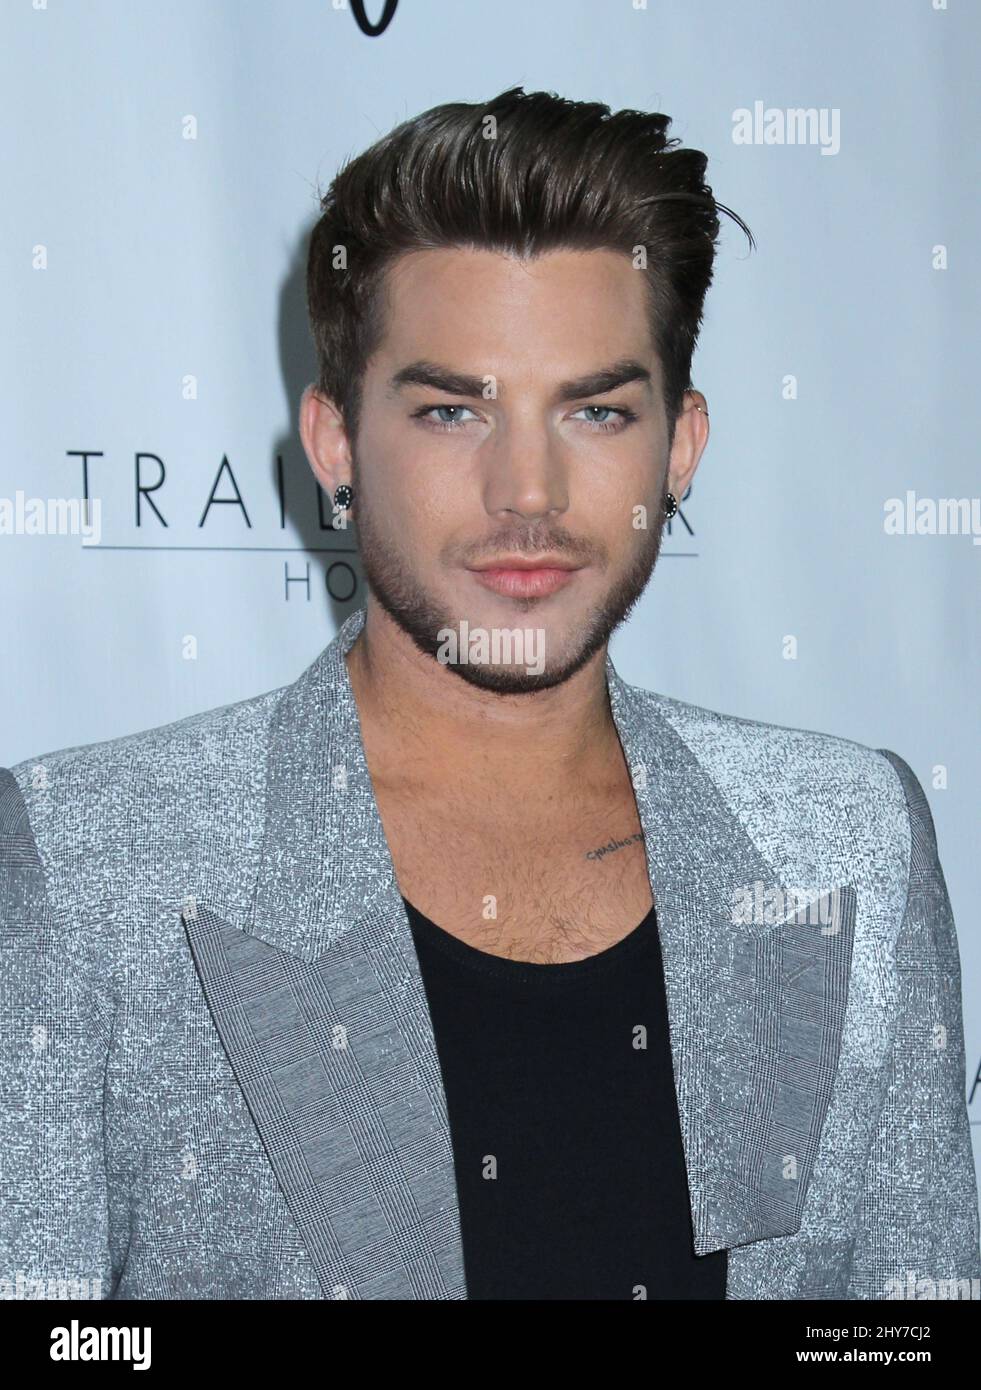 Adam Lambert attending Logo's 'Trailblazer Honors' 2015 held at Cathedral of St. John the Divine in Los Angeles, USA. Stock Photo